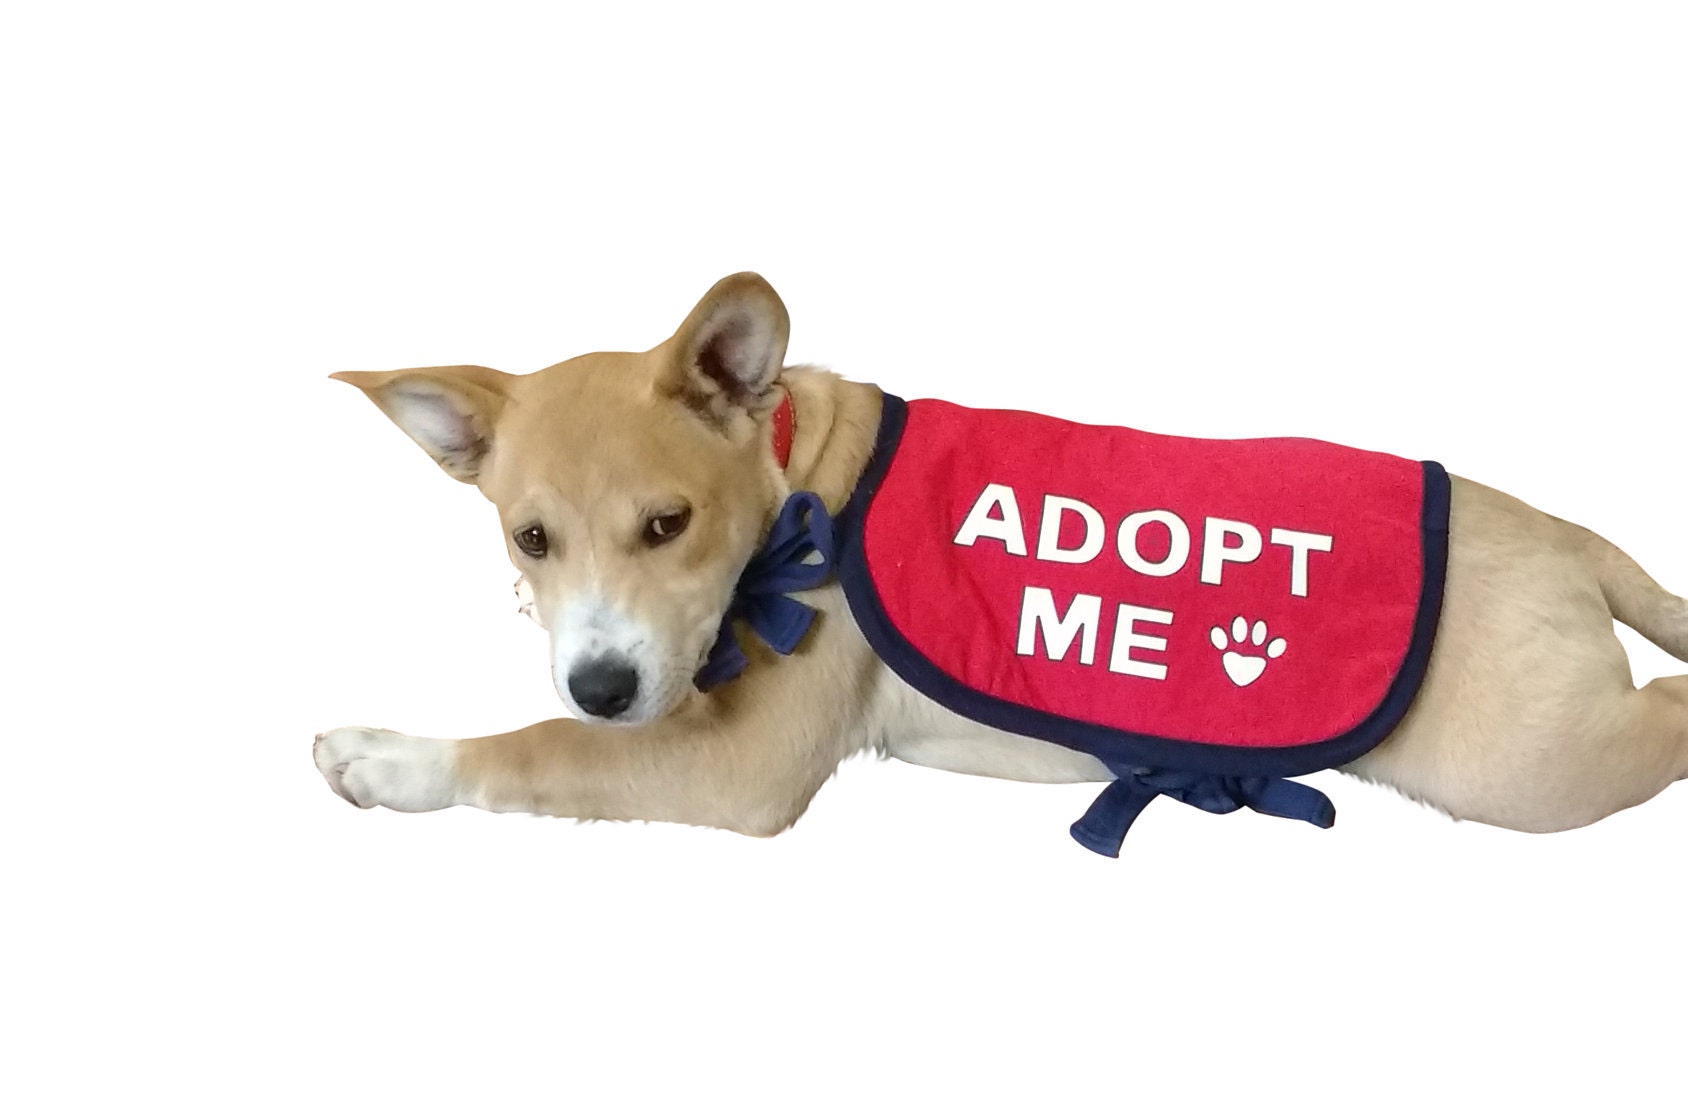 Buy Dogline Adopt Me Vest Patches - Removable Adopt Me Patch 2-Pack with  Reflective Printed Letters for Support Dog Vest Harness Collar or Leash  Large/X-Large Online at Low Prices in USA 